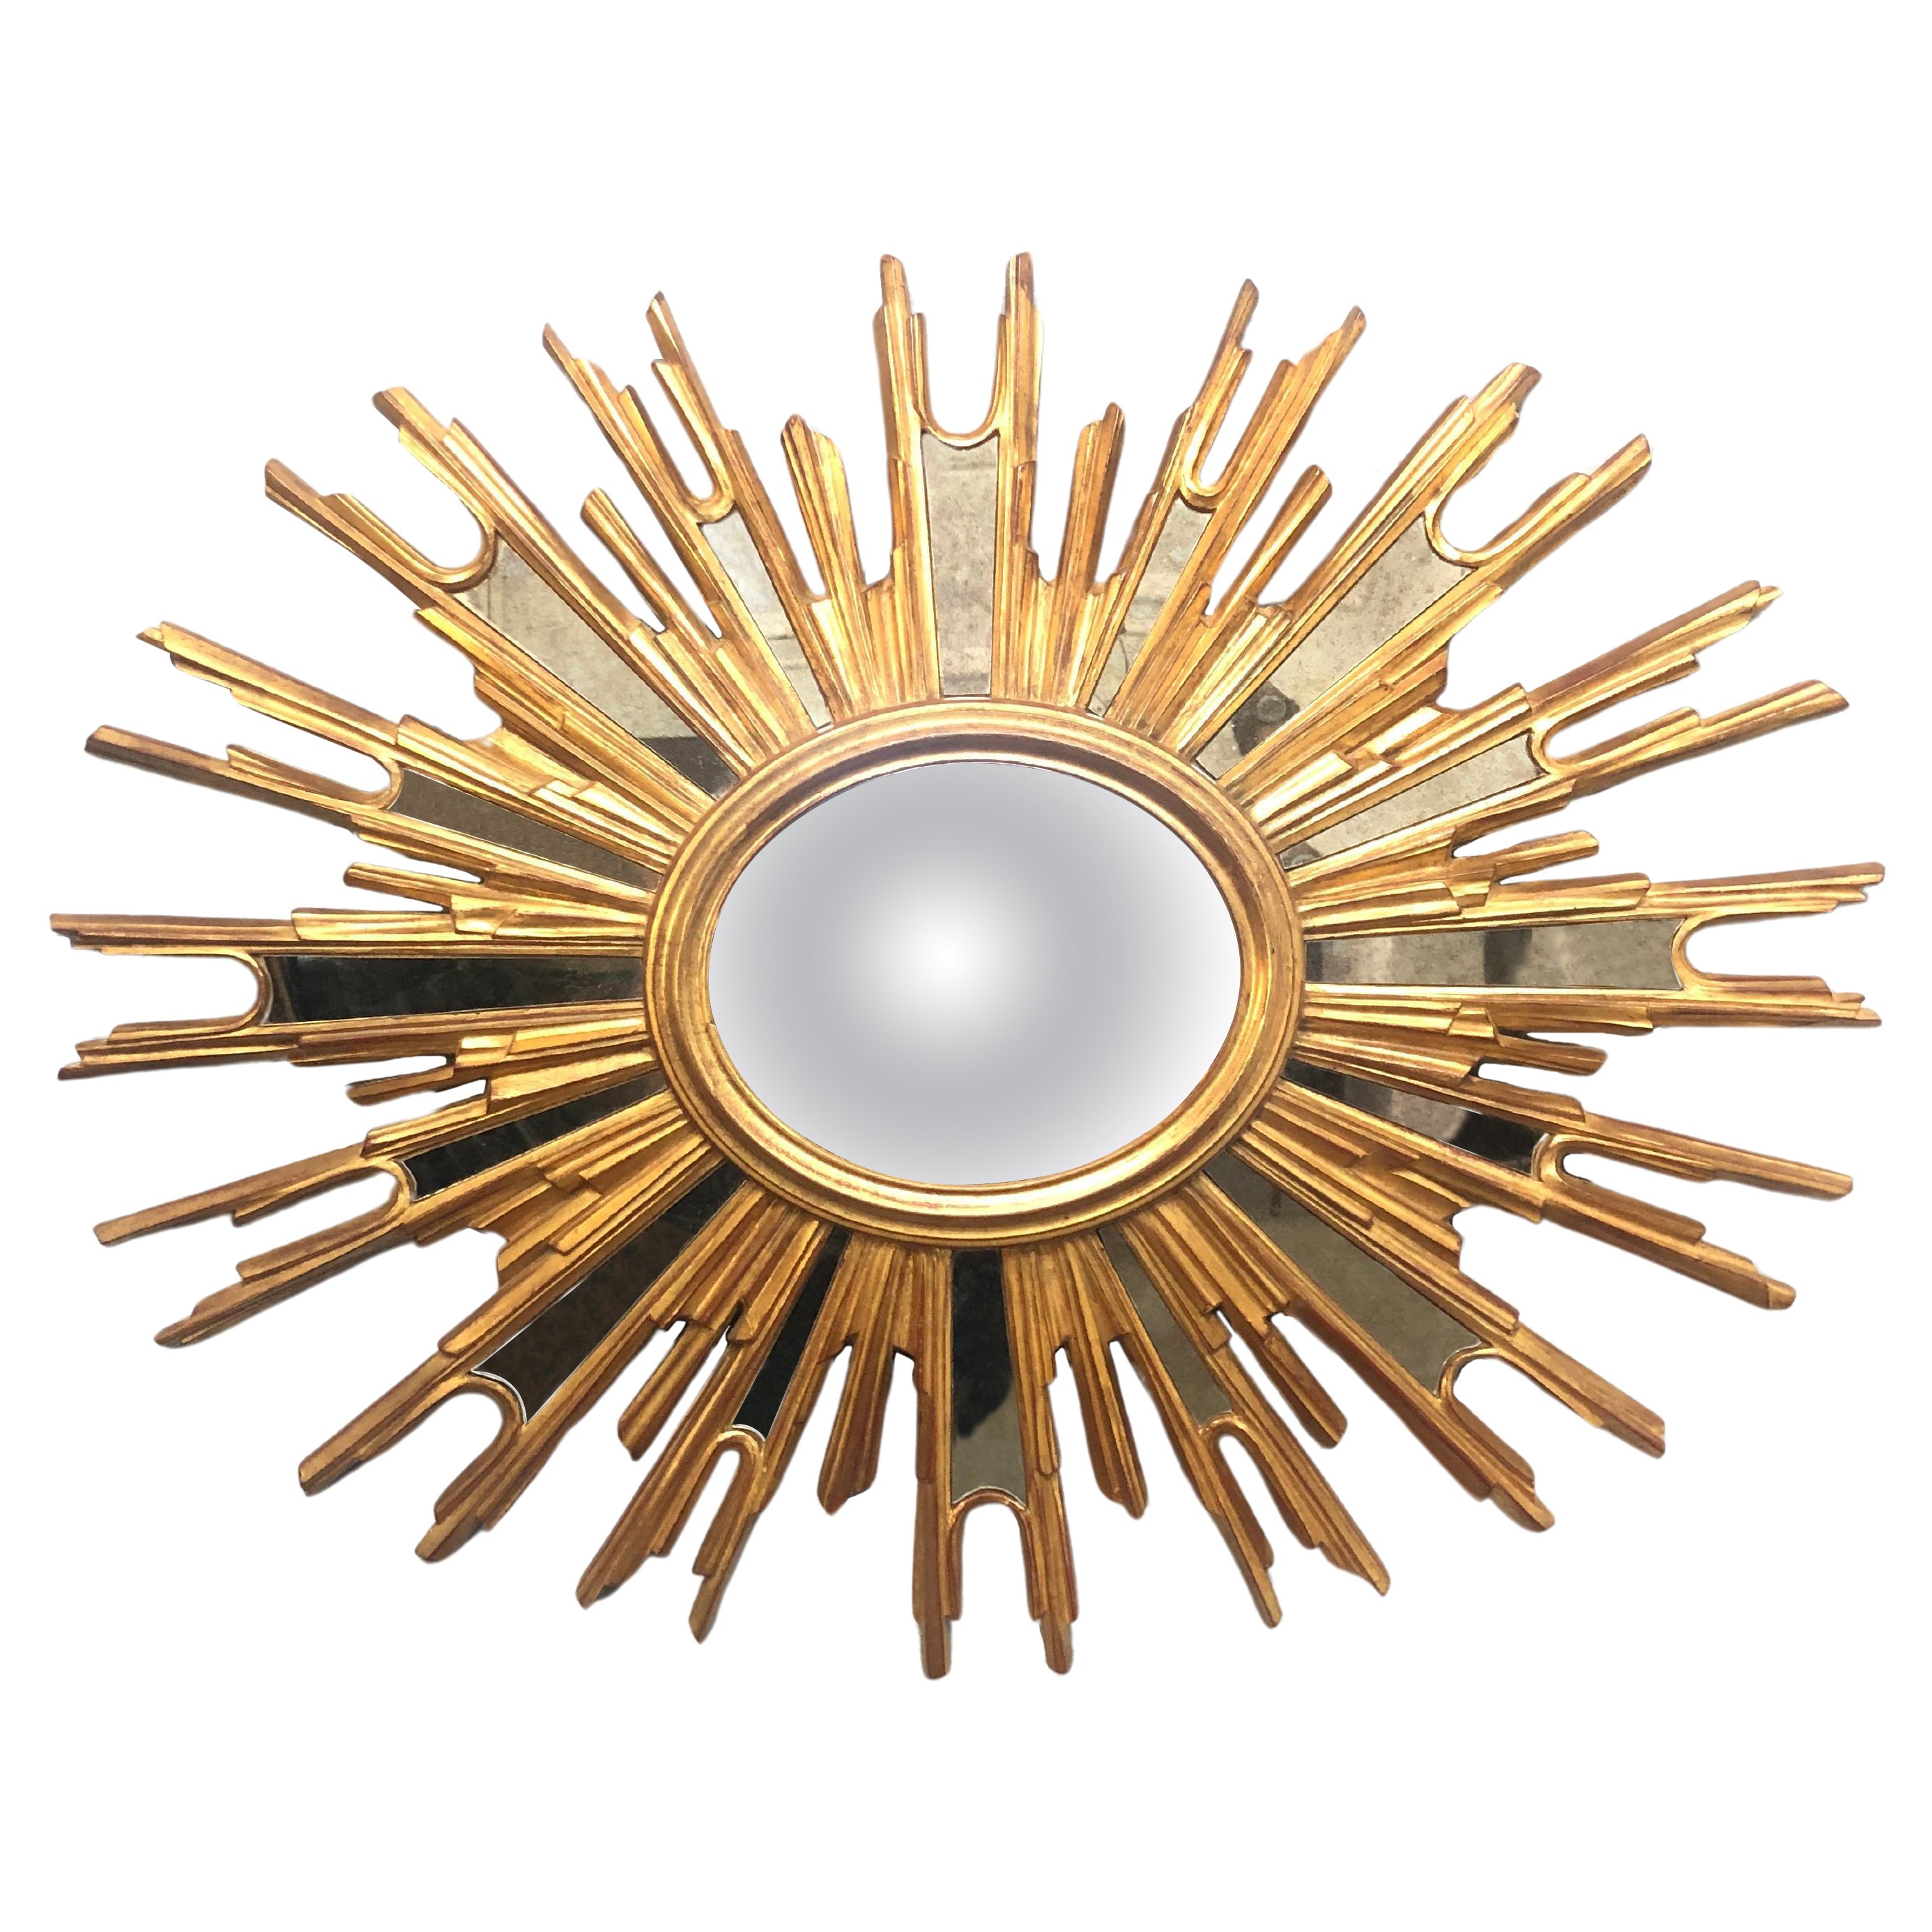 A Large Vintage Sunburst Mirror From Ateliers Armand Dutry Of Belgium  For Sale